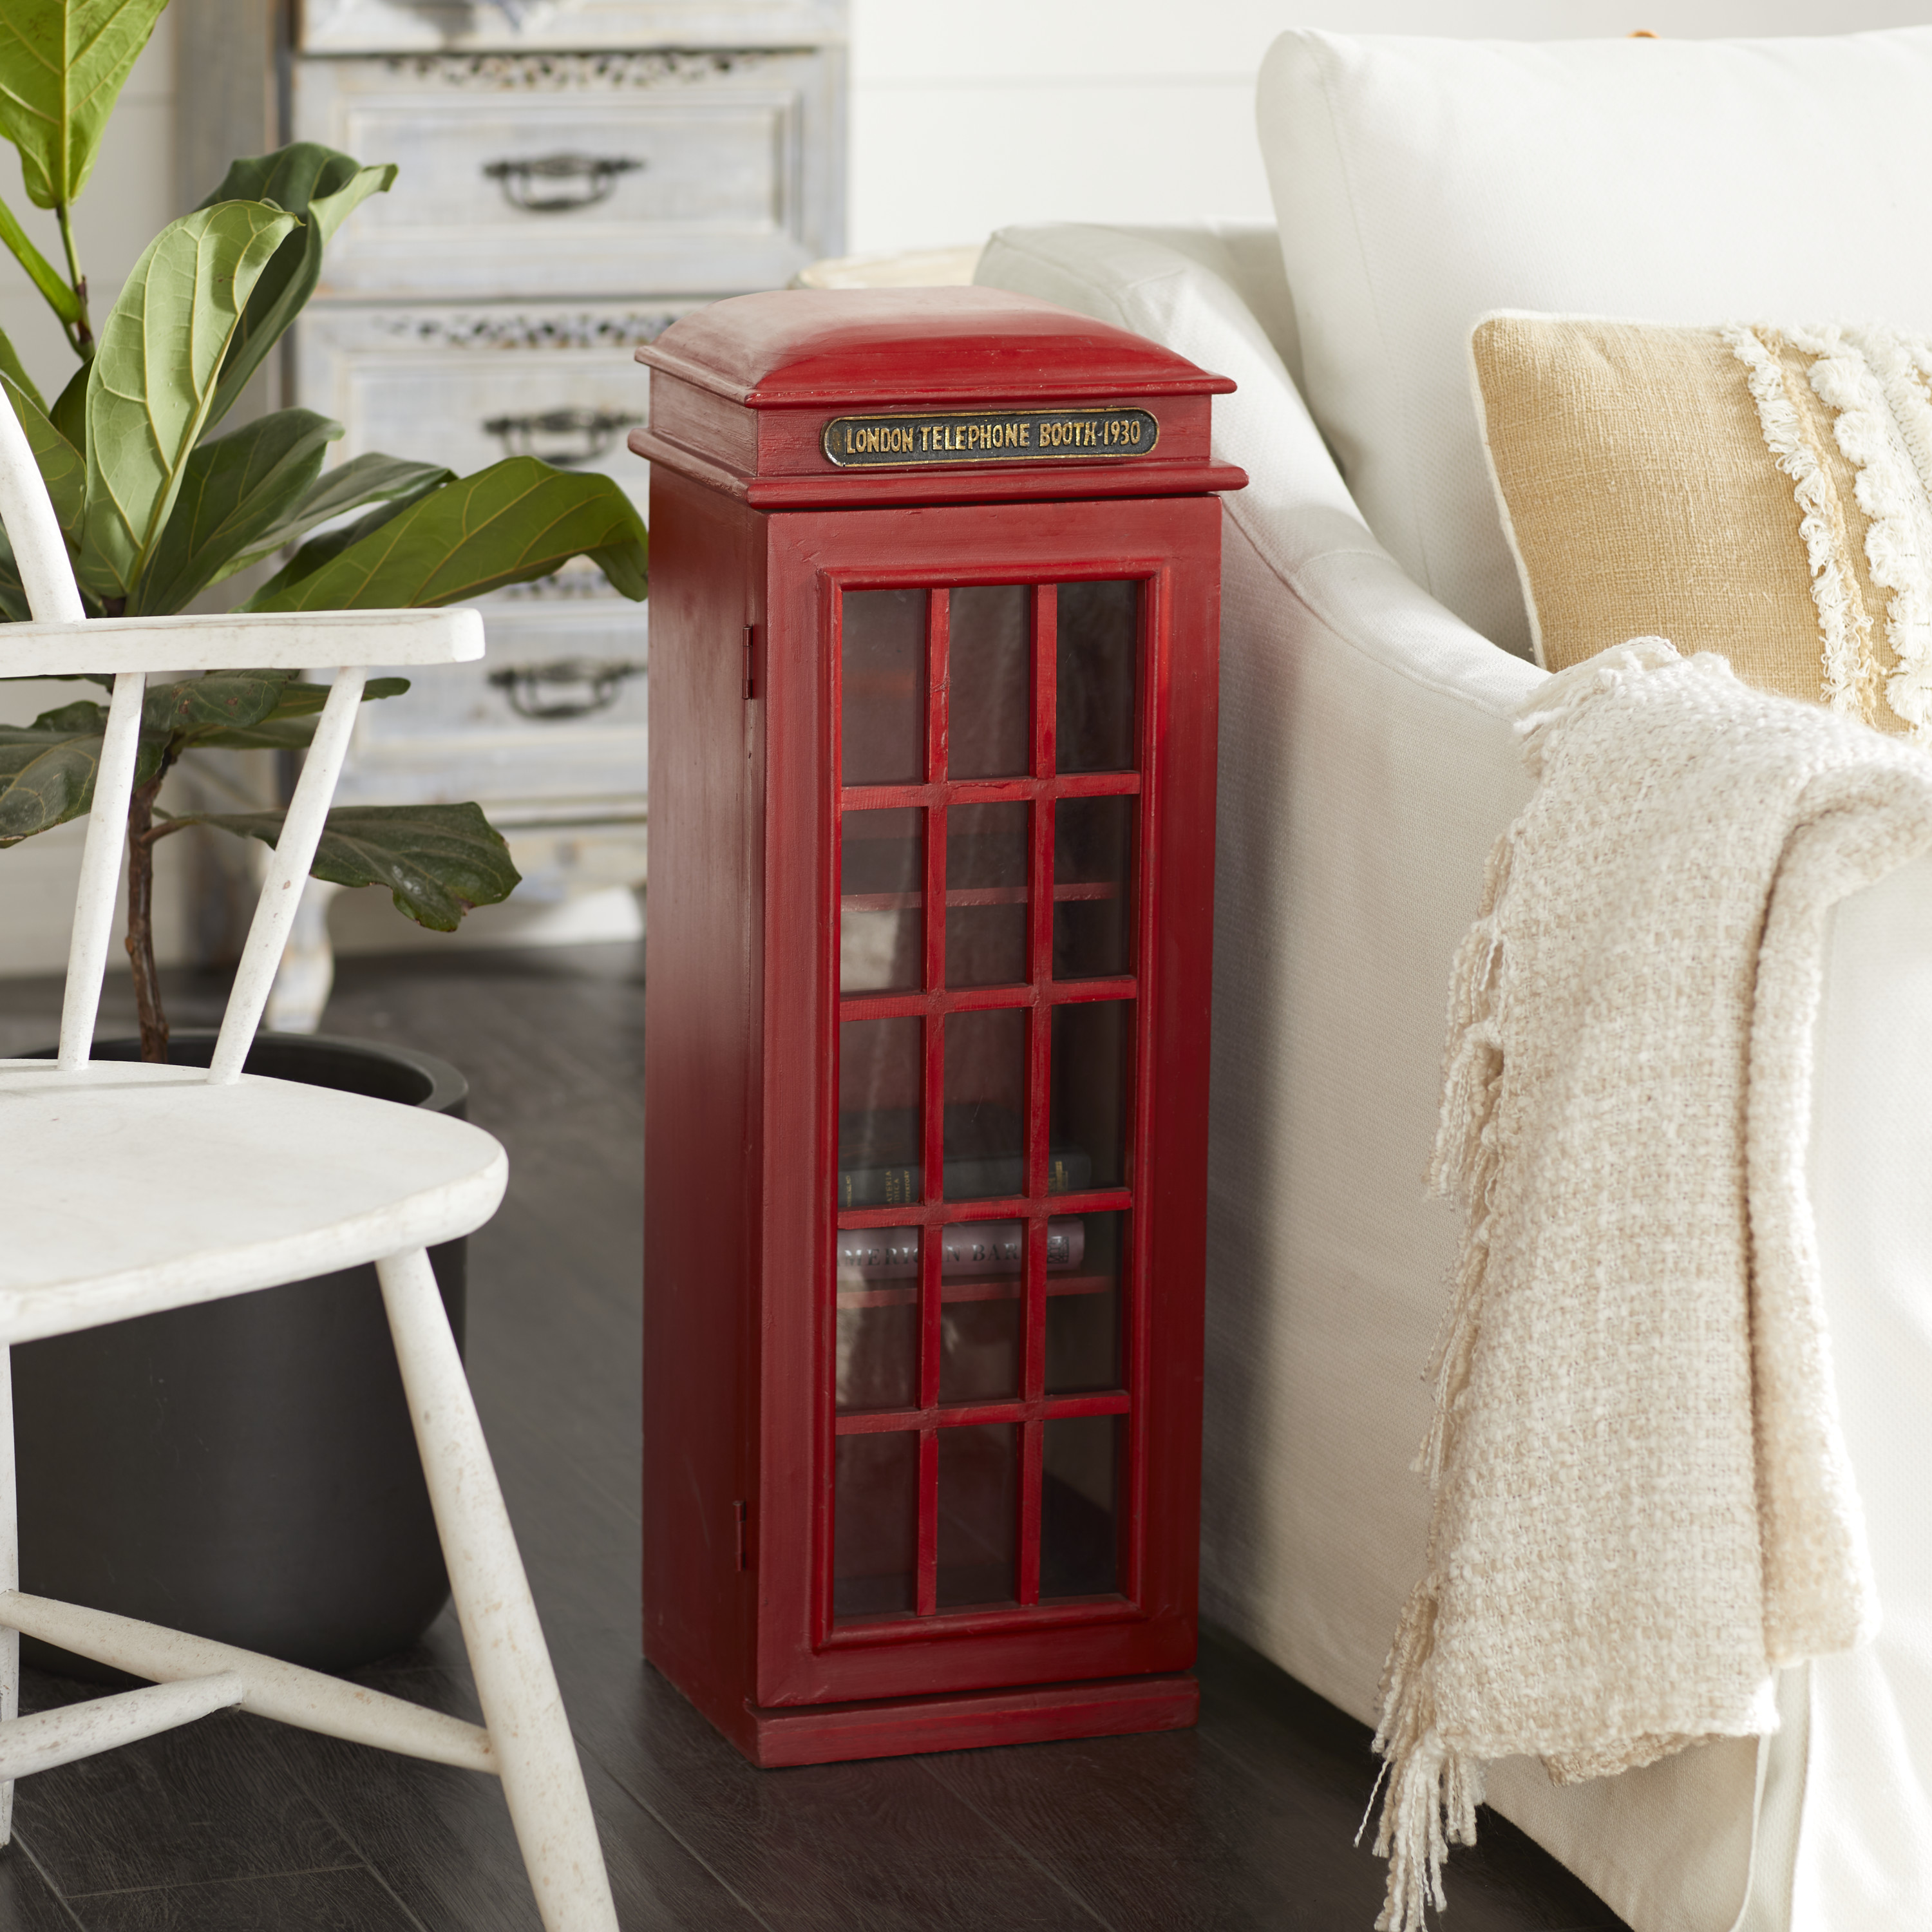 DecMode 11" x 30" Red Wooden London Telephone Booth 2 Shelf Storage Unit, 1-Piece - image 3 of 18